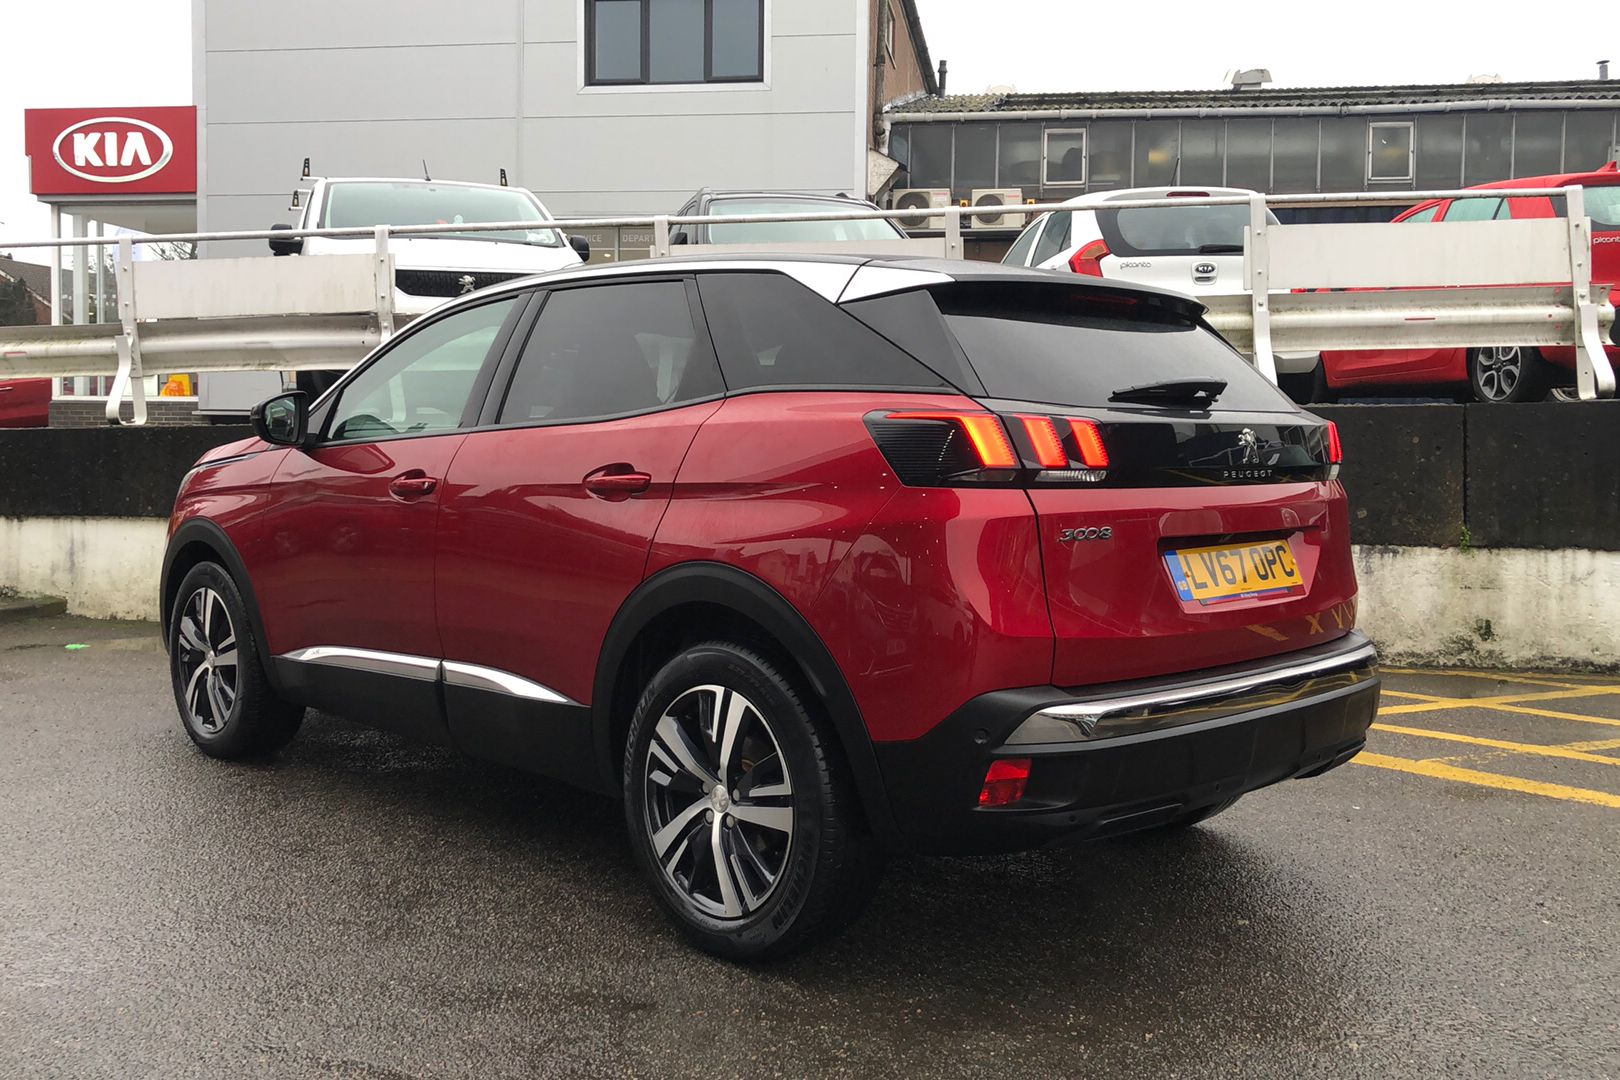 Used Peugeot 3008 1.2 Puretech S/S Allure 2017 for sale in Sidcup, Kent